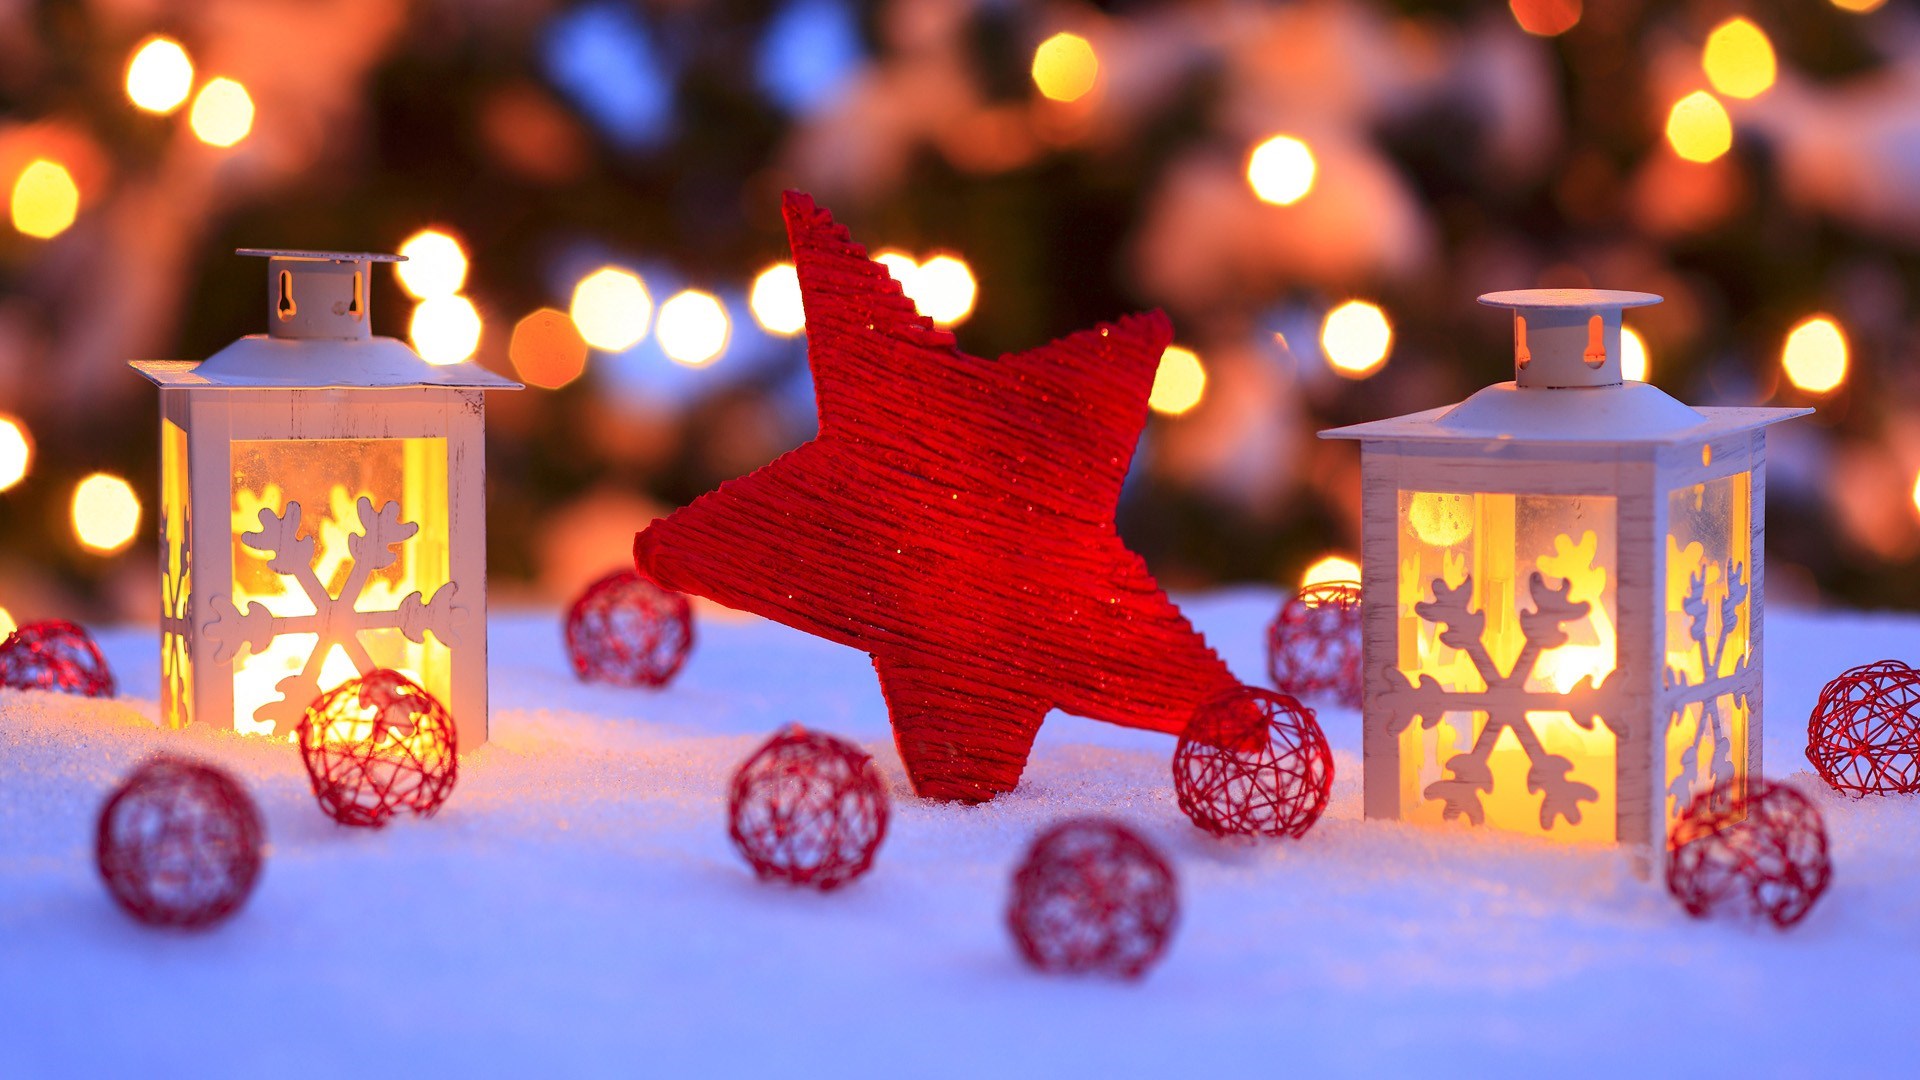 Winter, Snow, Lanterns, Christmas Candles - HD wallpapers